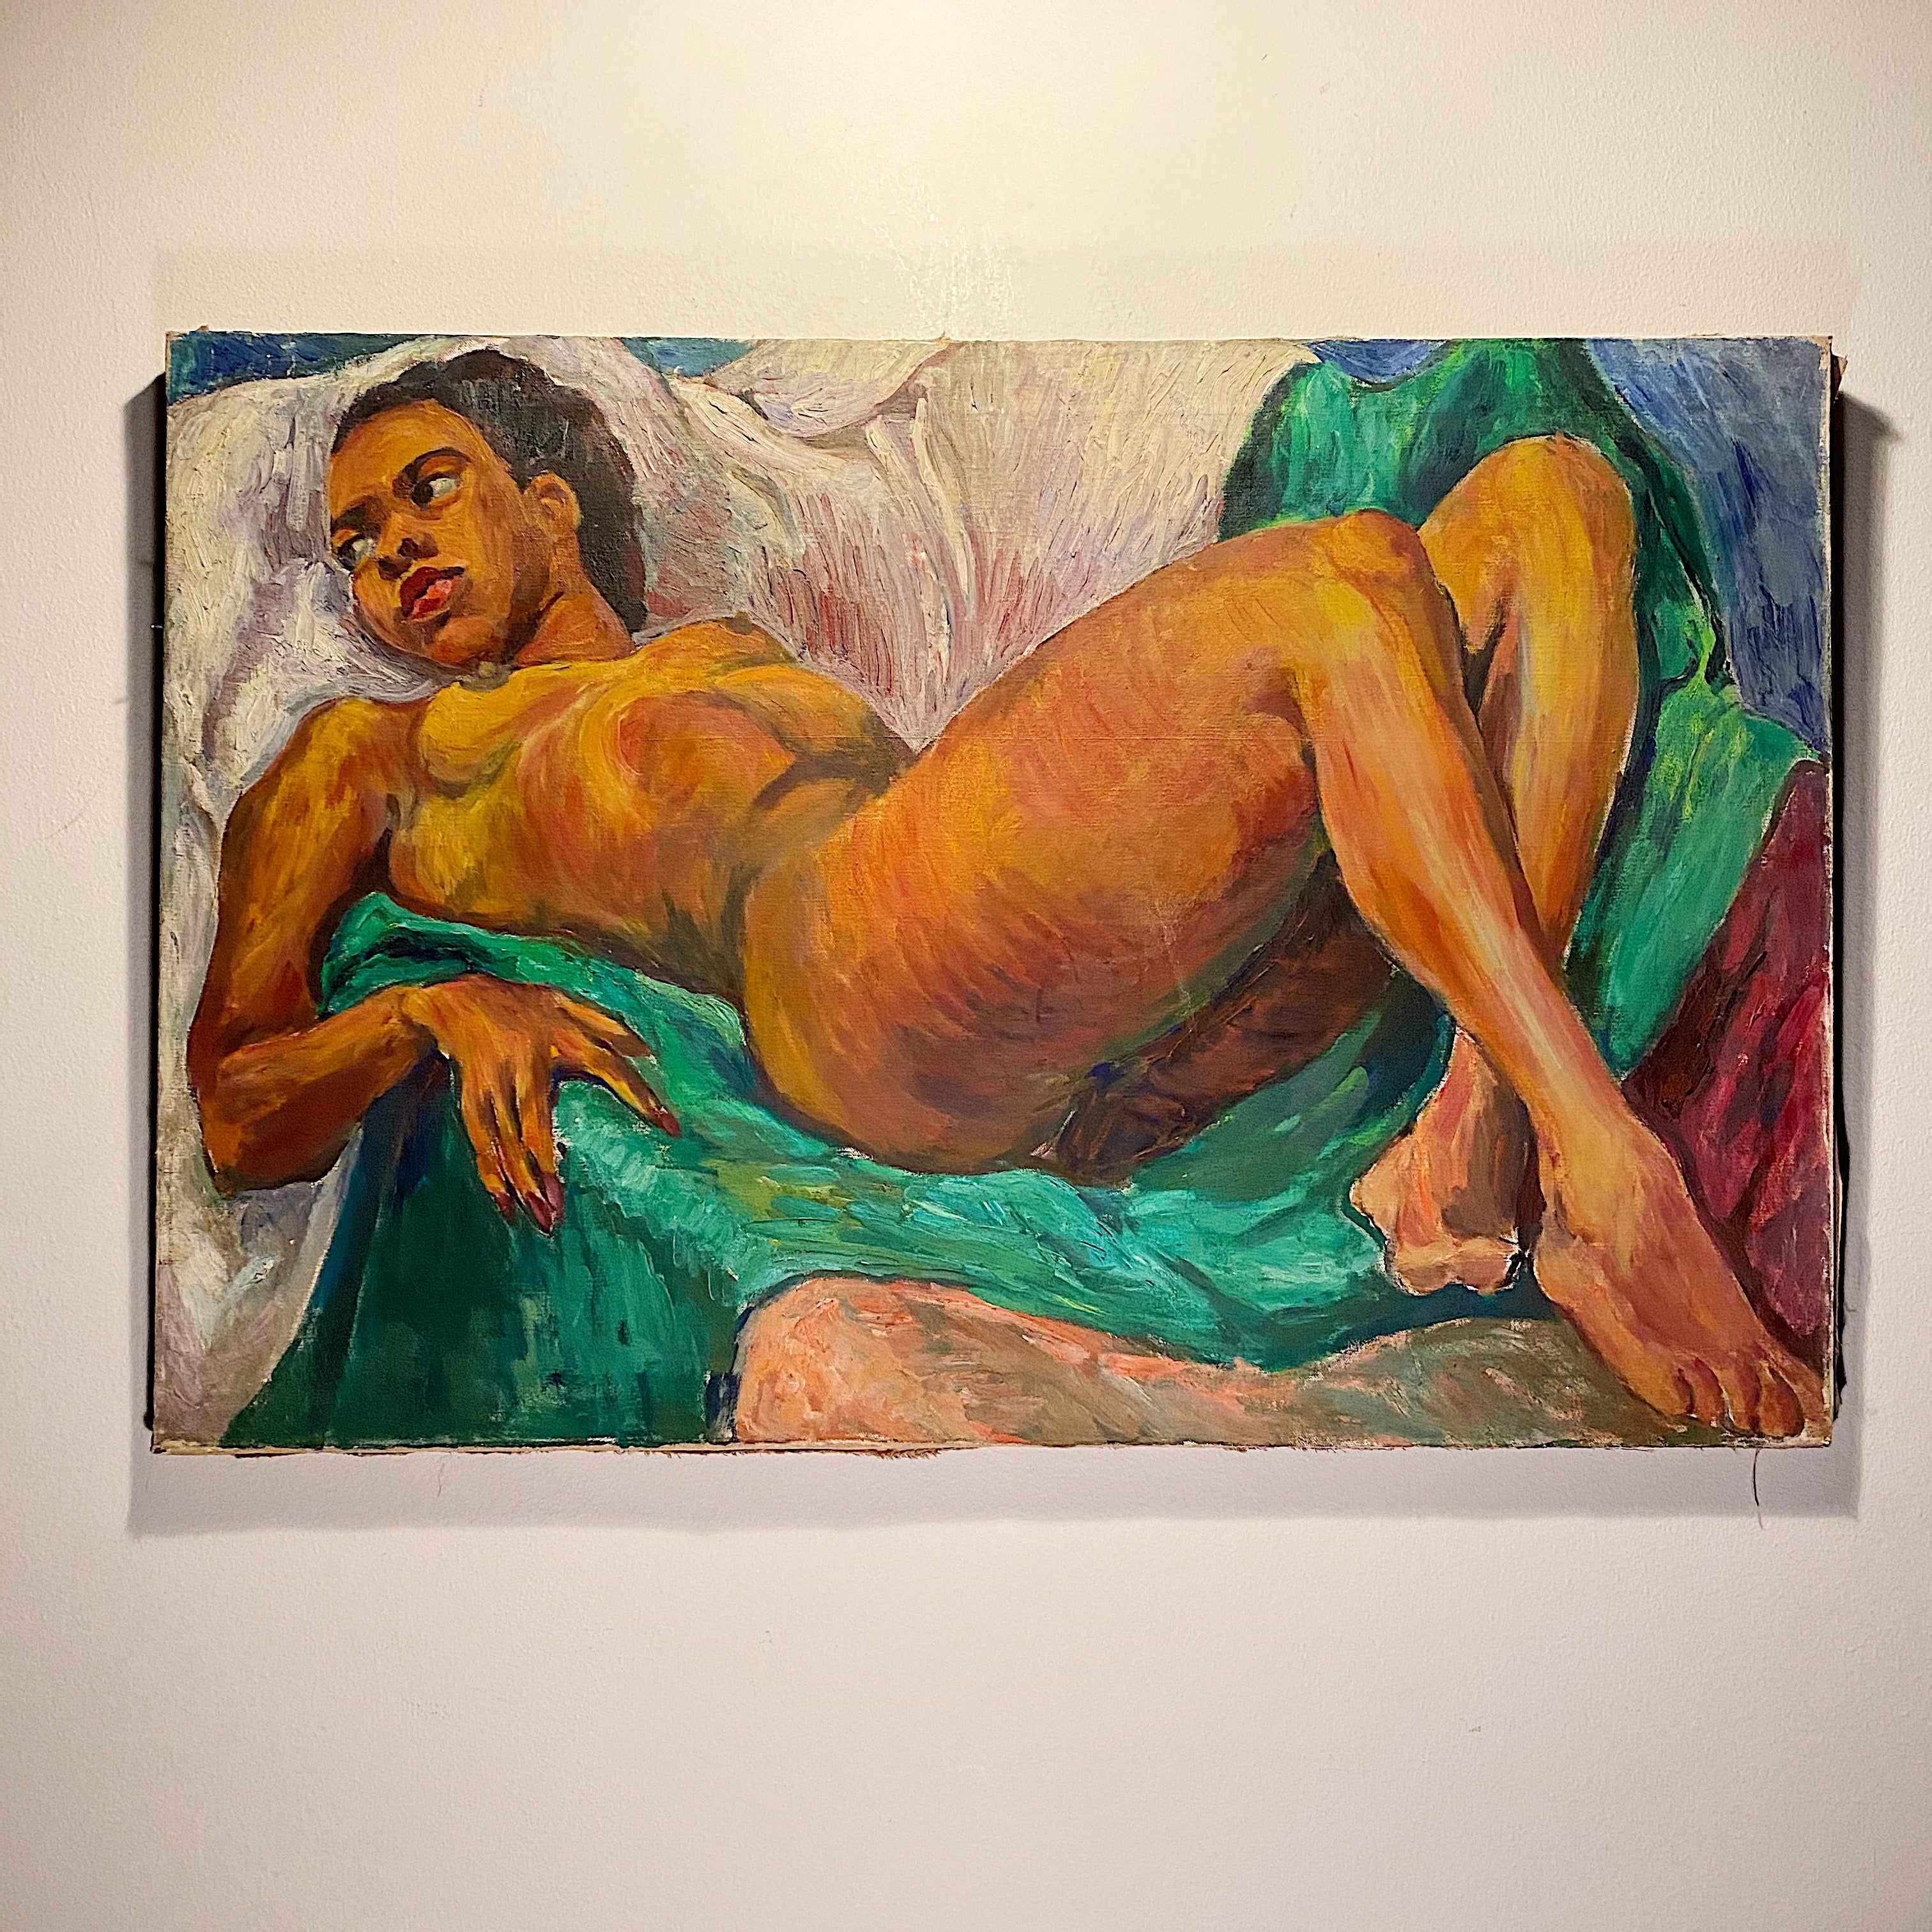 Rare WPA Era Painting of African American Nude Woman by Lillian Jean Nosko - 1940s Chicago Institute of Art - Midcentury Artwork - Listed Artist